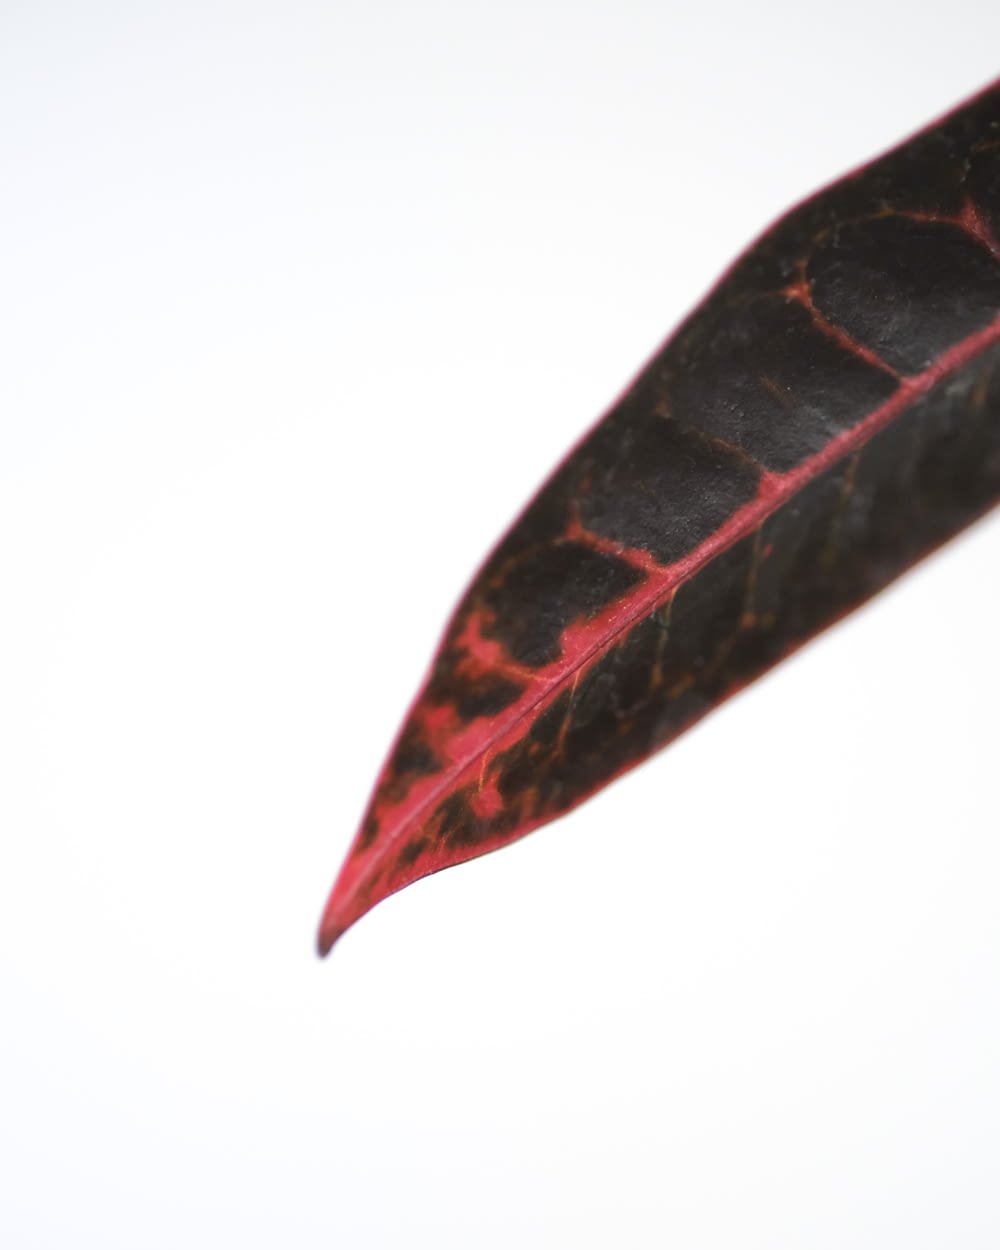 red and black leaf on white background